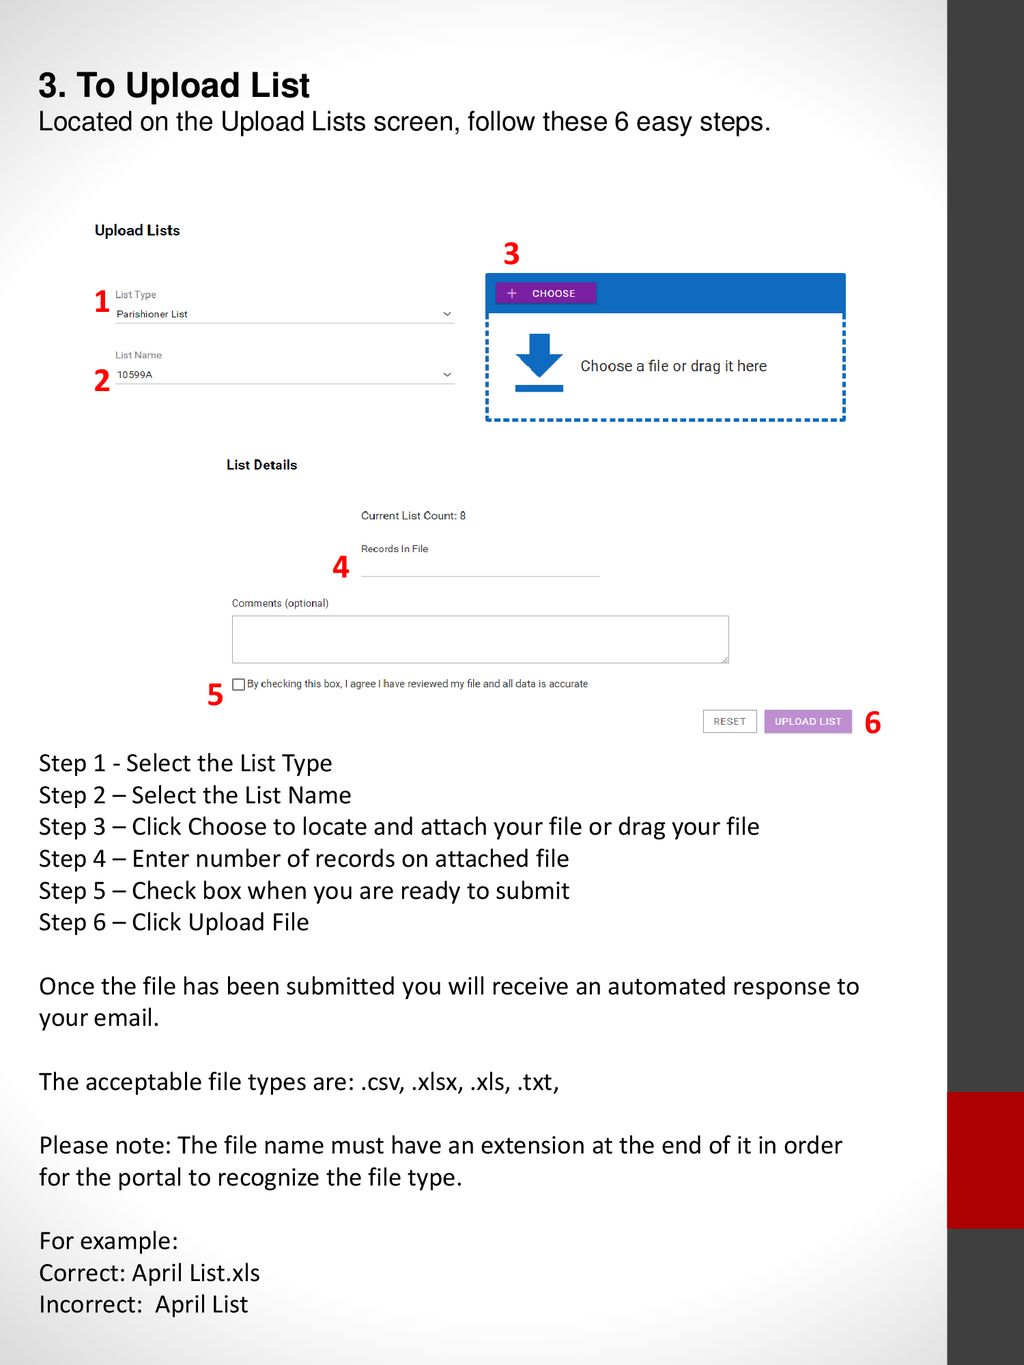 3. To Upload List Located on the Upload Lists screen, follow these 6 easy steps